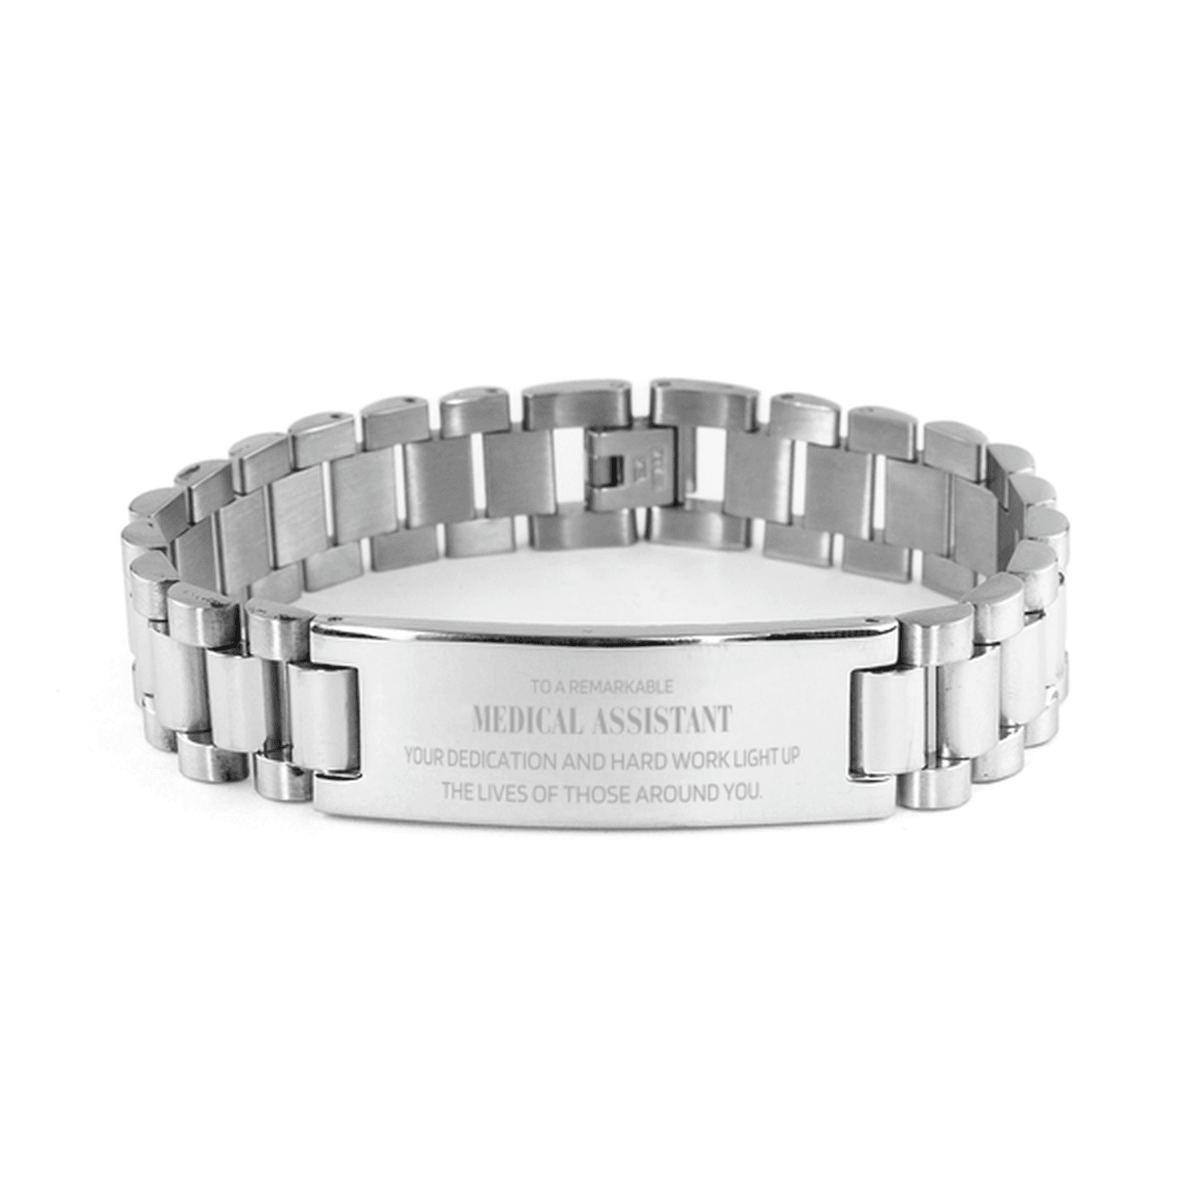 Remarkable Medical Assistant Gifts, Your dedication and hard work, Inspirational Birthday Christmas Unique Ladder Stainless Steel Bracelet For Medical Assistant, Coworkers, Men, Women, Friends - Mallard Moon Gift Shop